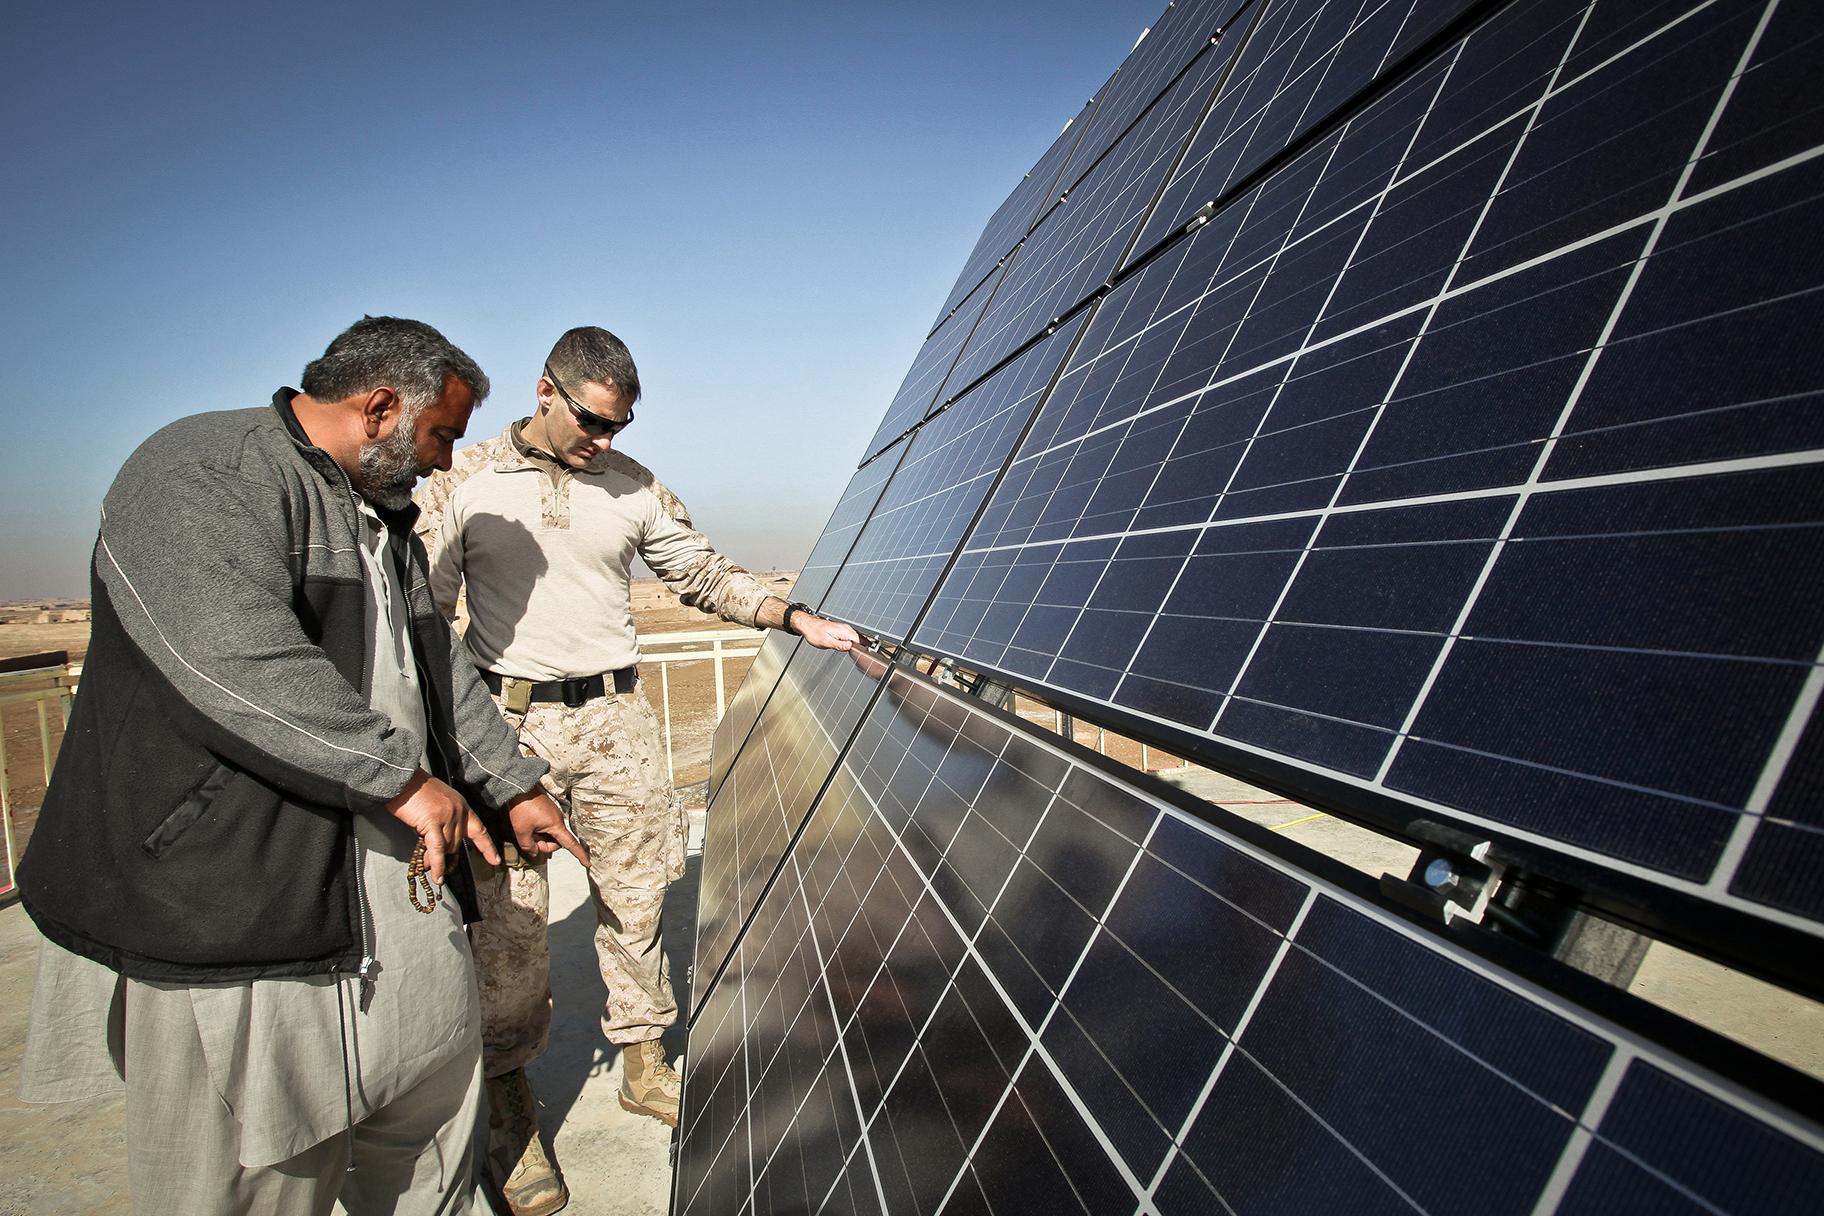 Maj. Erich Bergiel, right, inspects the solar panels on the roof of the Marjeh Fruit and Vegetable Packing Facility in Afghanistan while he talks with Abdul Rahman, a renewable energy engineer. (Master Gunnery Sgt. Phil Mehringer / U.S. Department of Defense) 